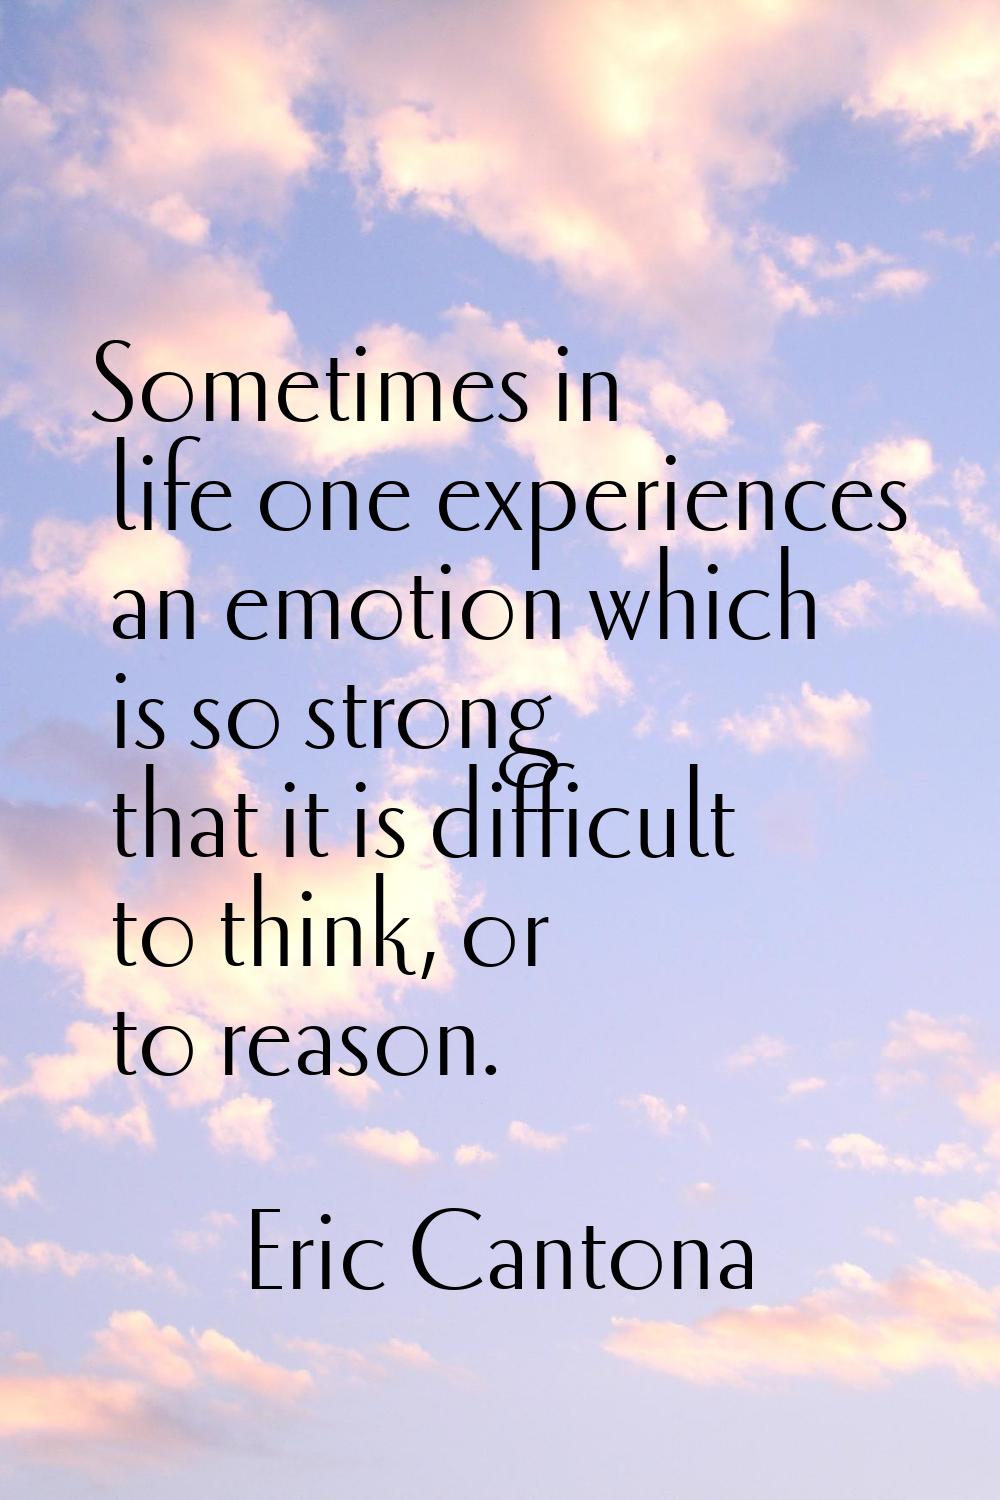 Sometimes in life one experiences an emotion which is so strong that it is difficult to think, or t